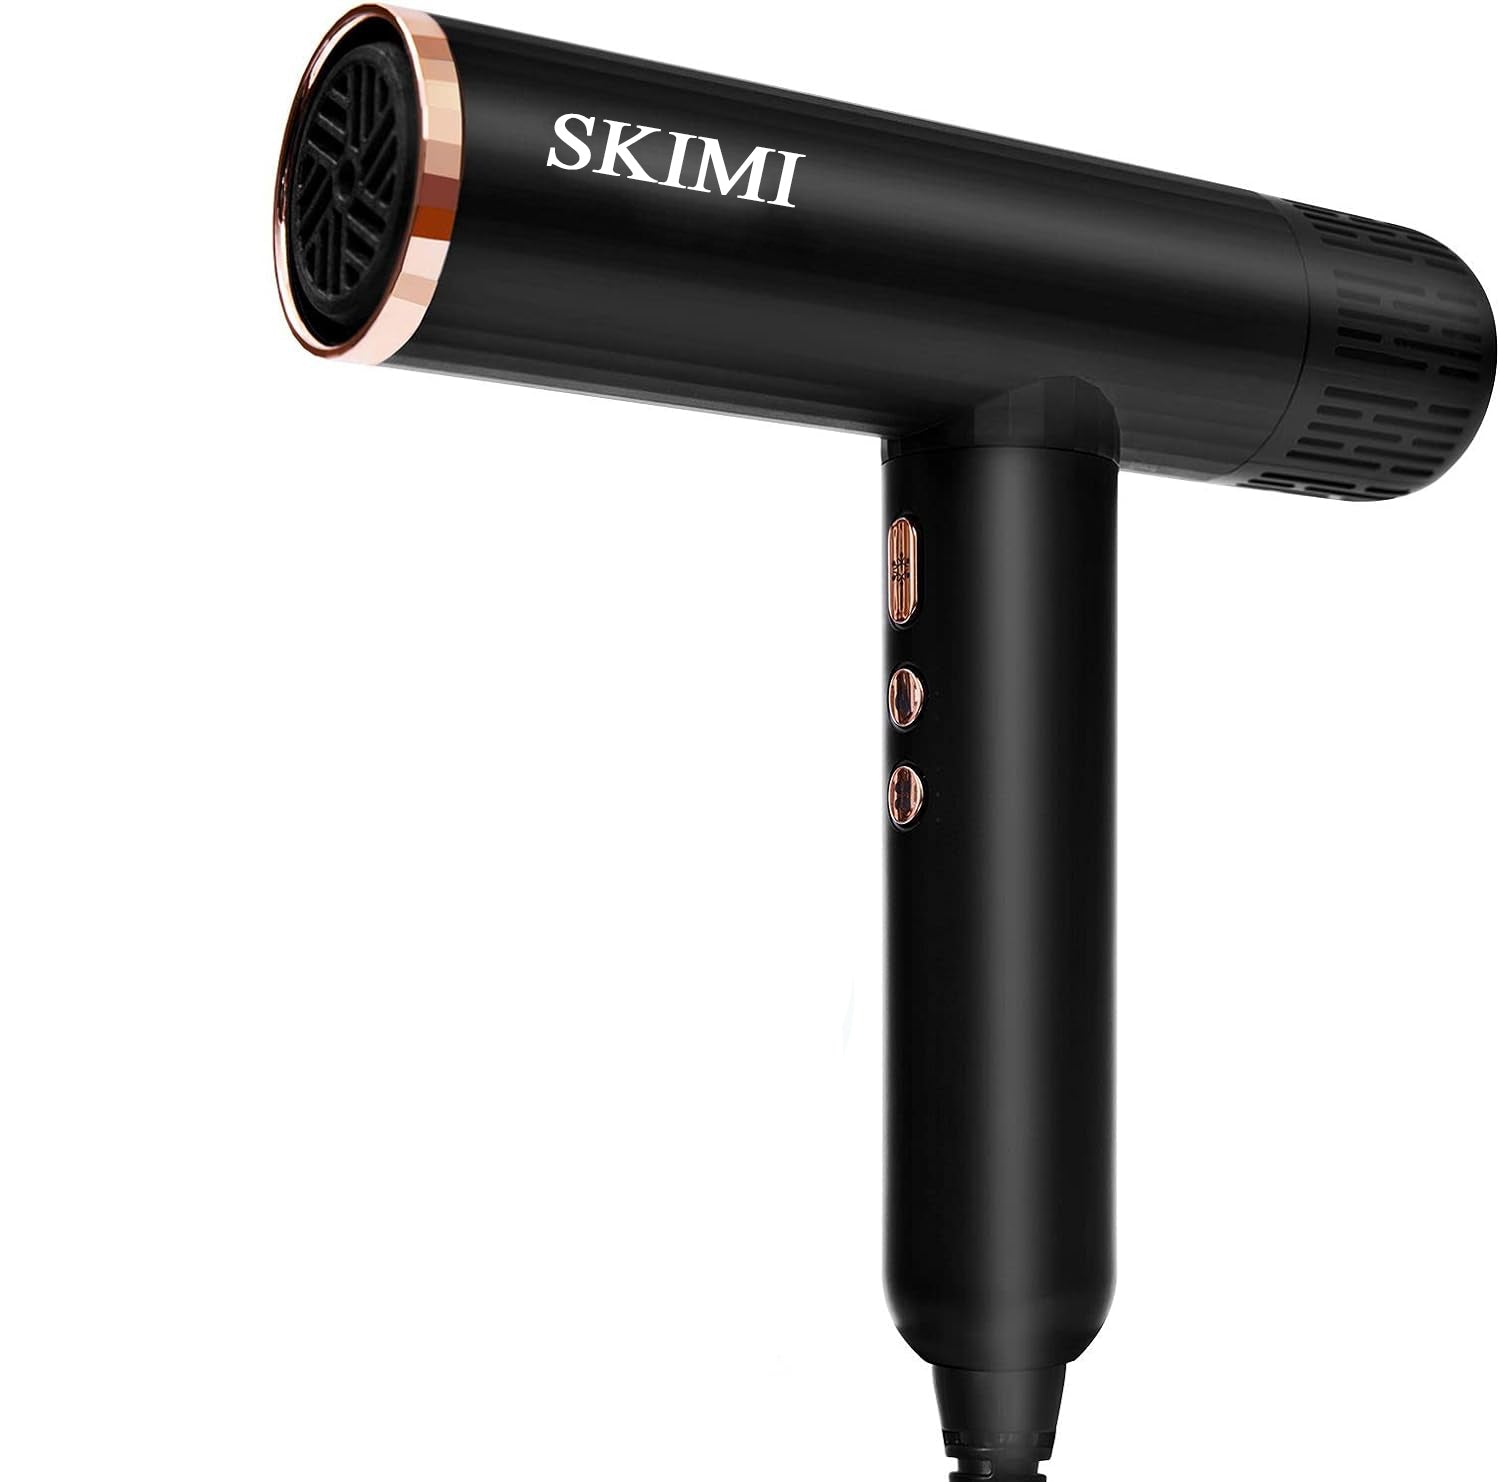 SKIMI Ionic Hair Dryer, Professional Blow Dryer with 3 Attachments, 110000RPM High-Speed Brushless Motor for Fast Drying